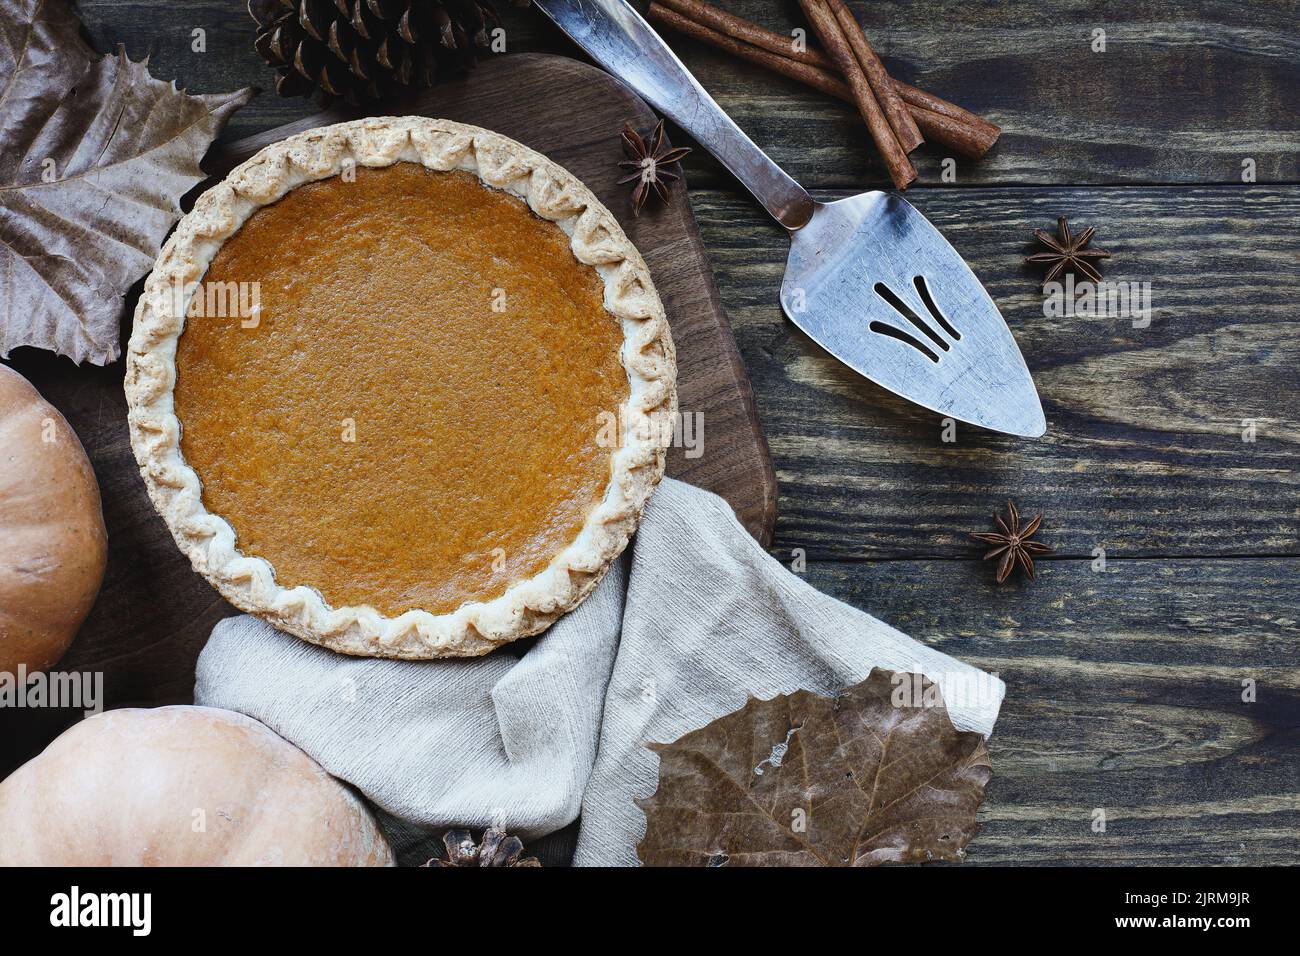 A whole fresh baked pumpkin pie over wood background with ripe pumpkins, cinnamon and star of anise. Top view or flatlay. Stock Photo